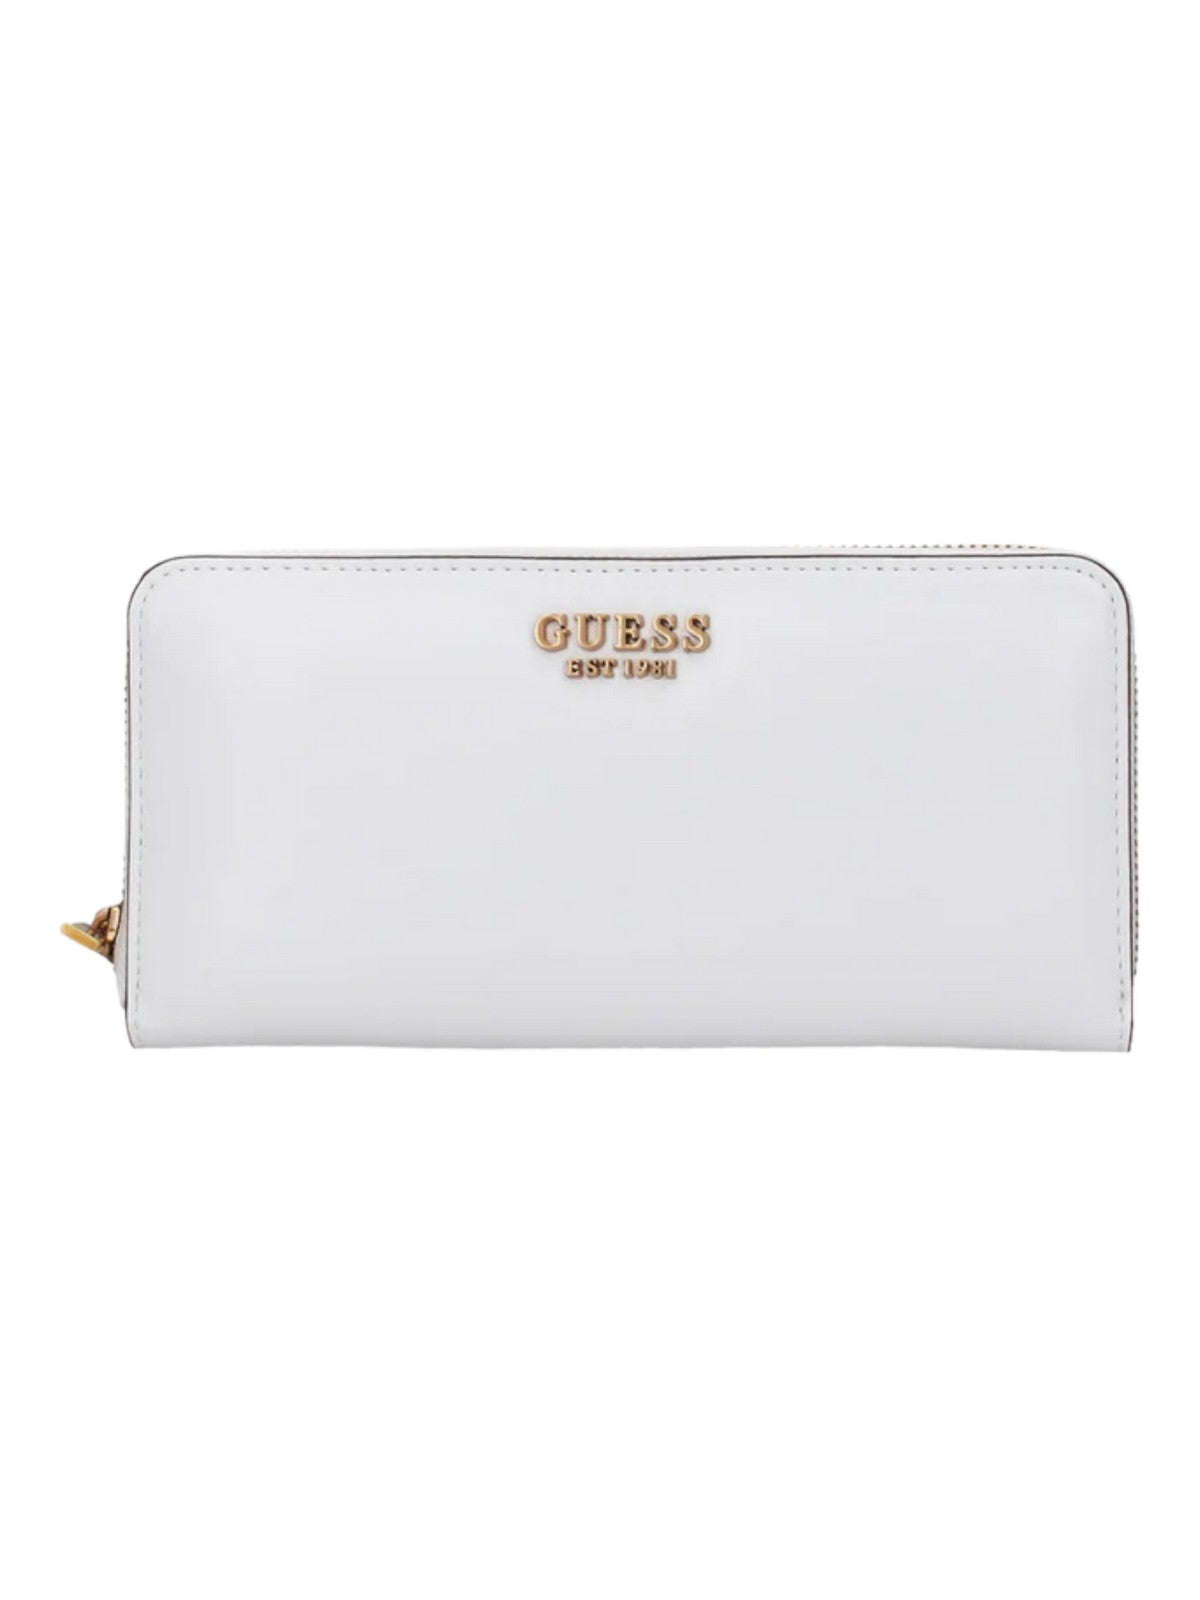 GUESS Portefeuille pour femmes SWVB85 00460 WHI Blanc